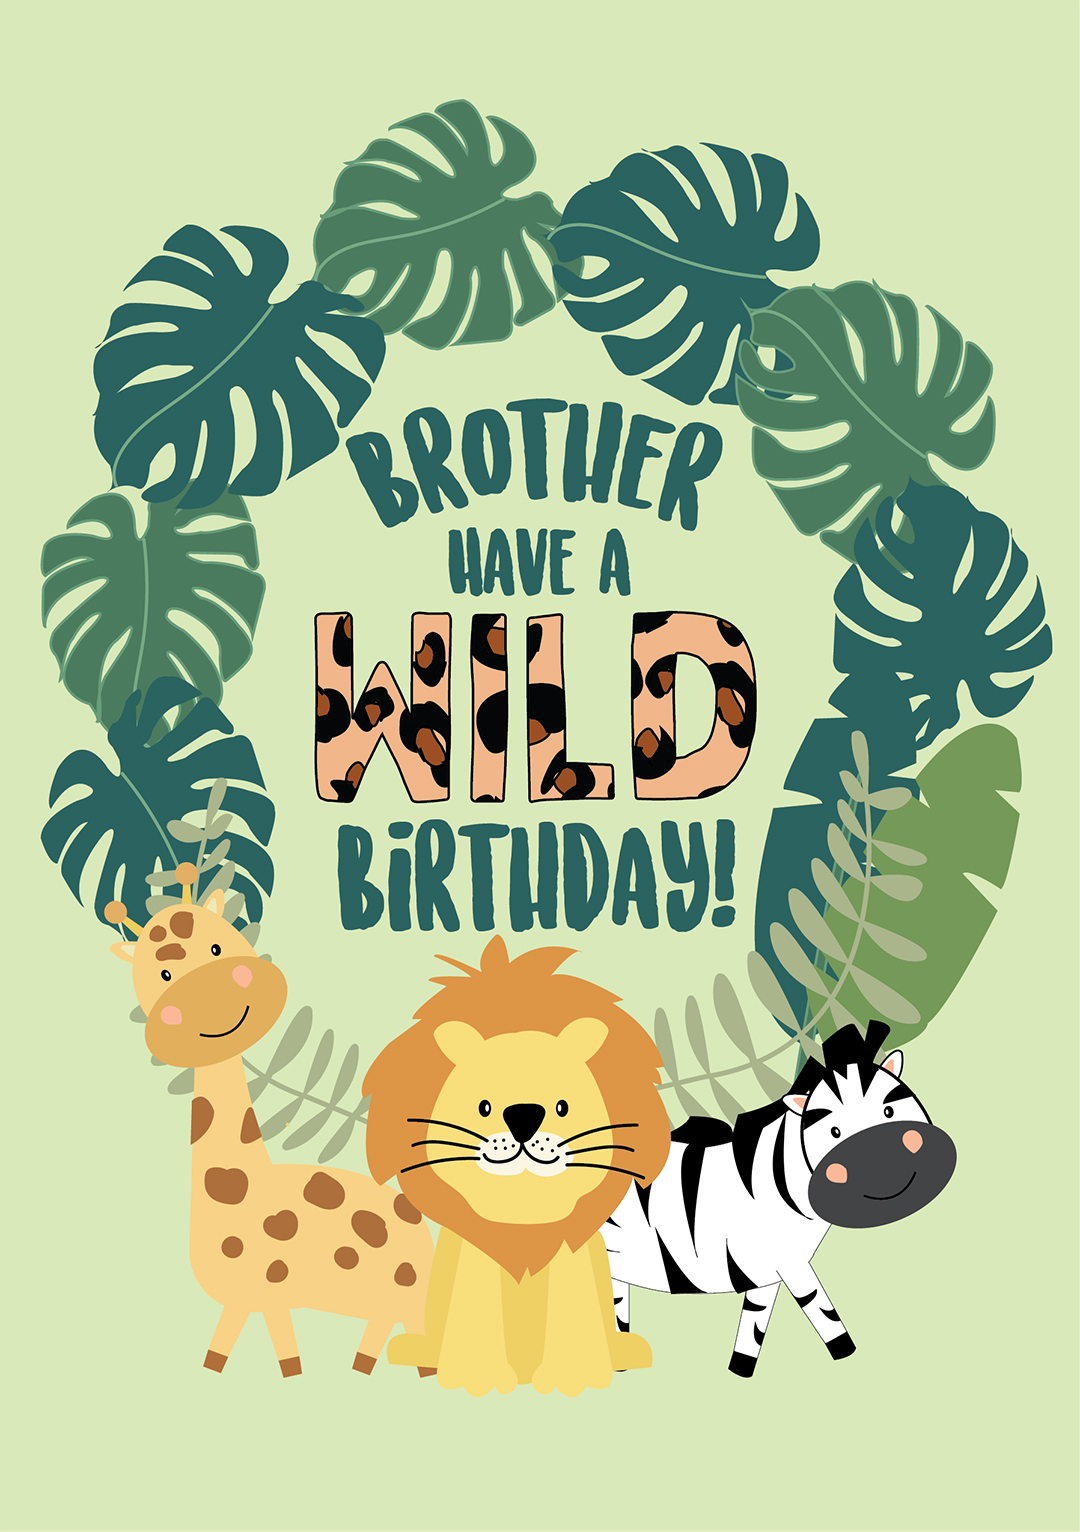 Brother, Have a Wild Birthday!